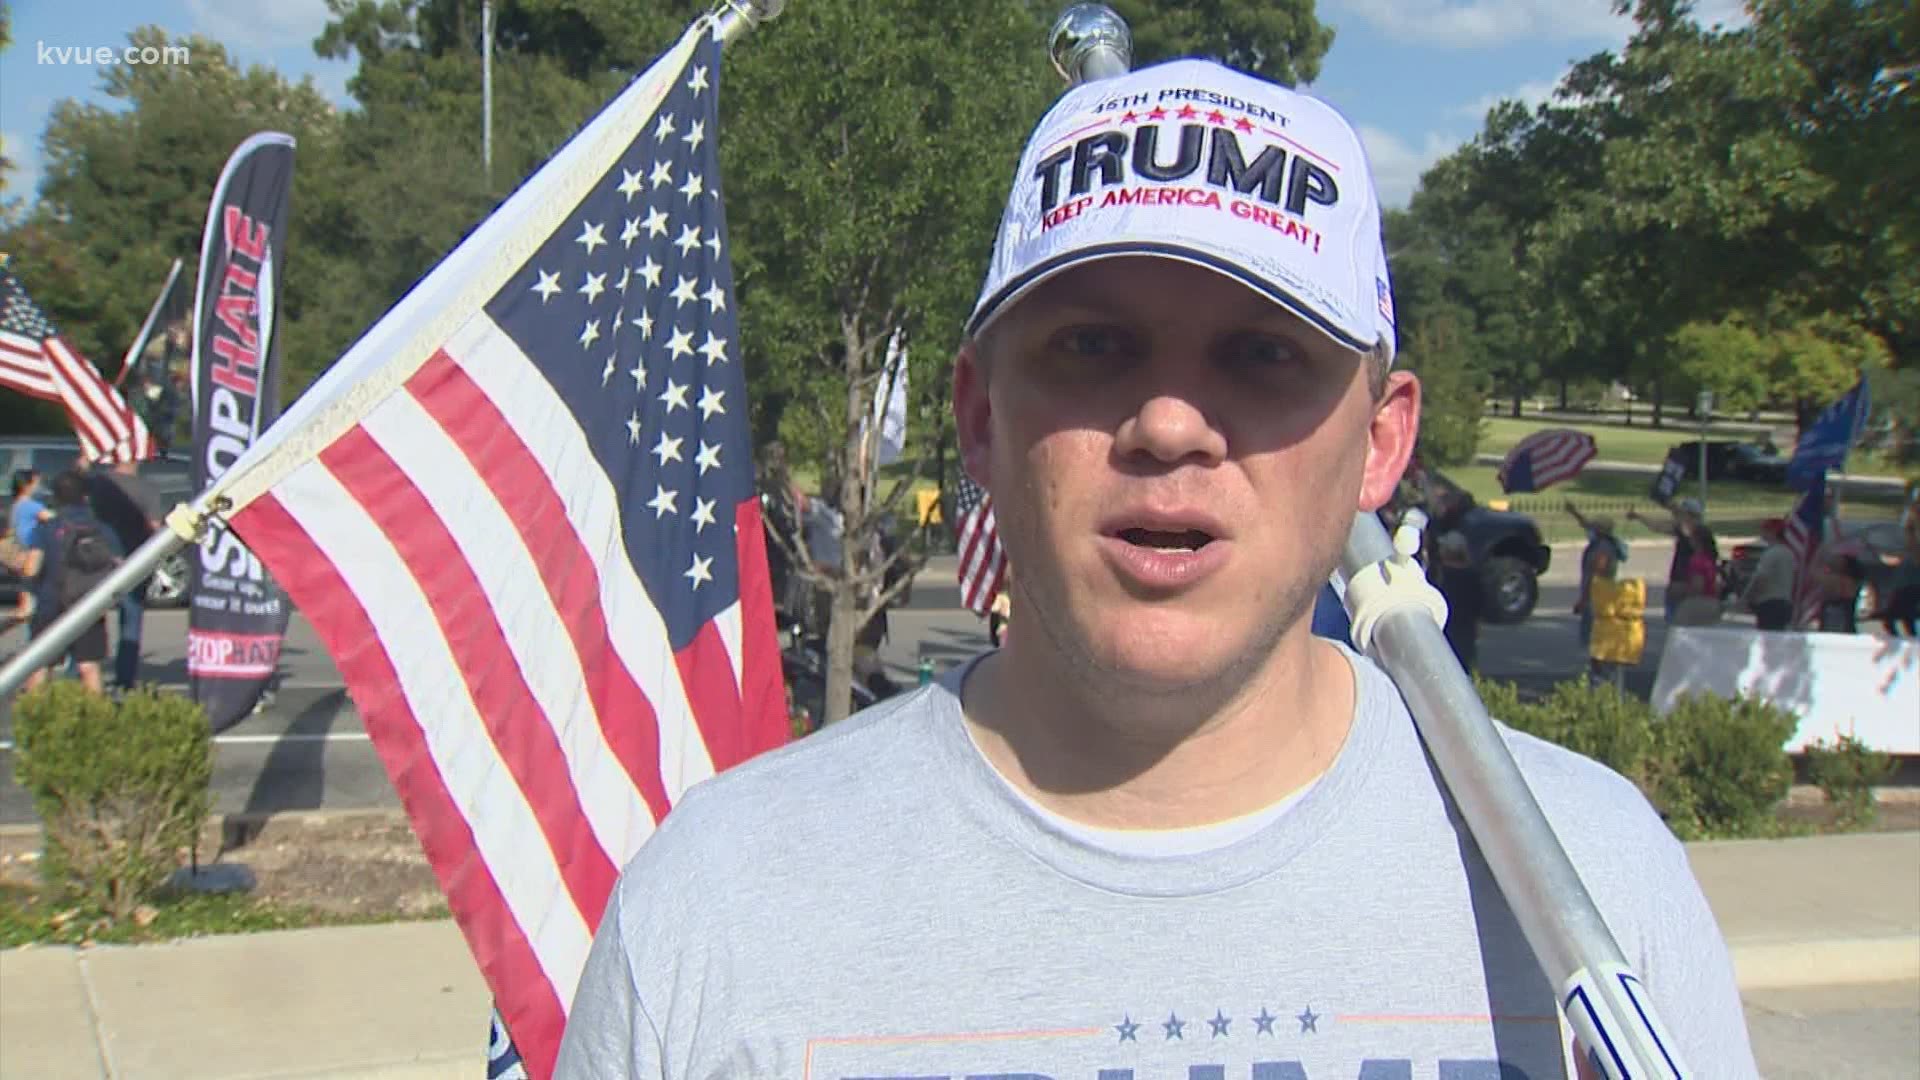 President Trump's supporters gathered in Austin on Saturday afternoon for a rally against the election results. Many came from all over the state.